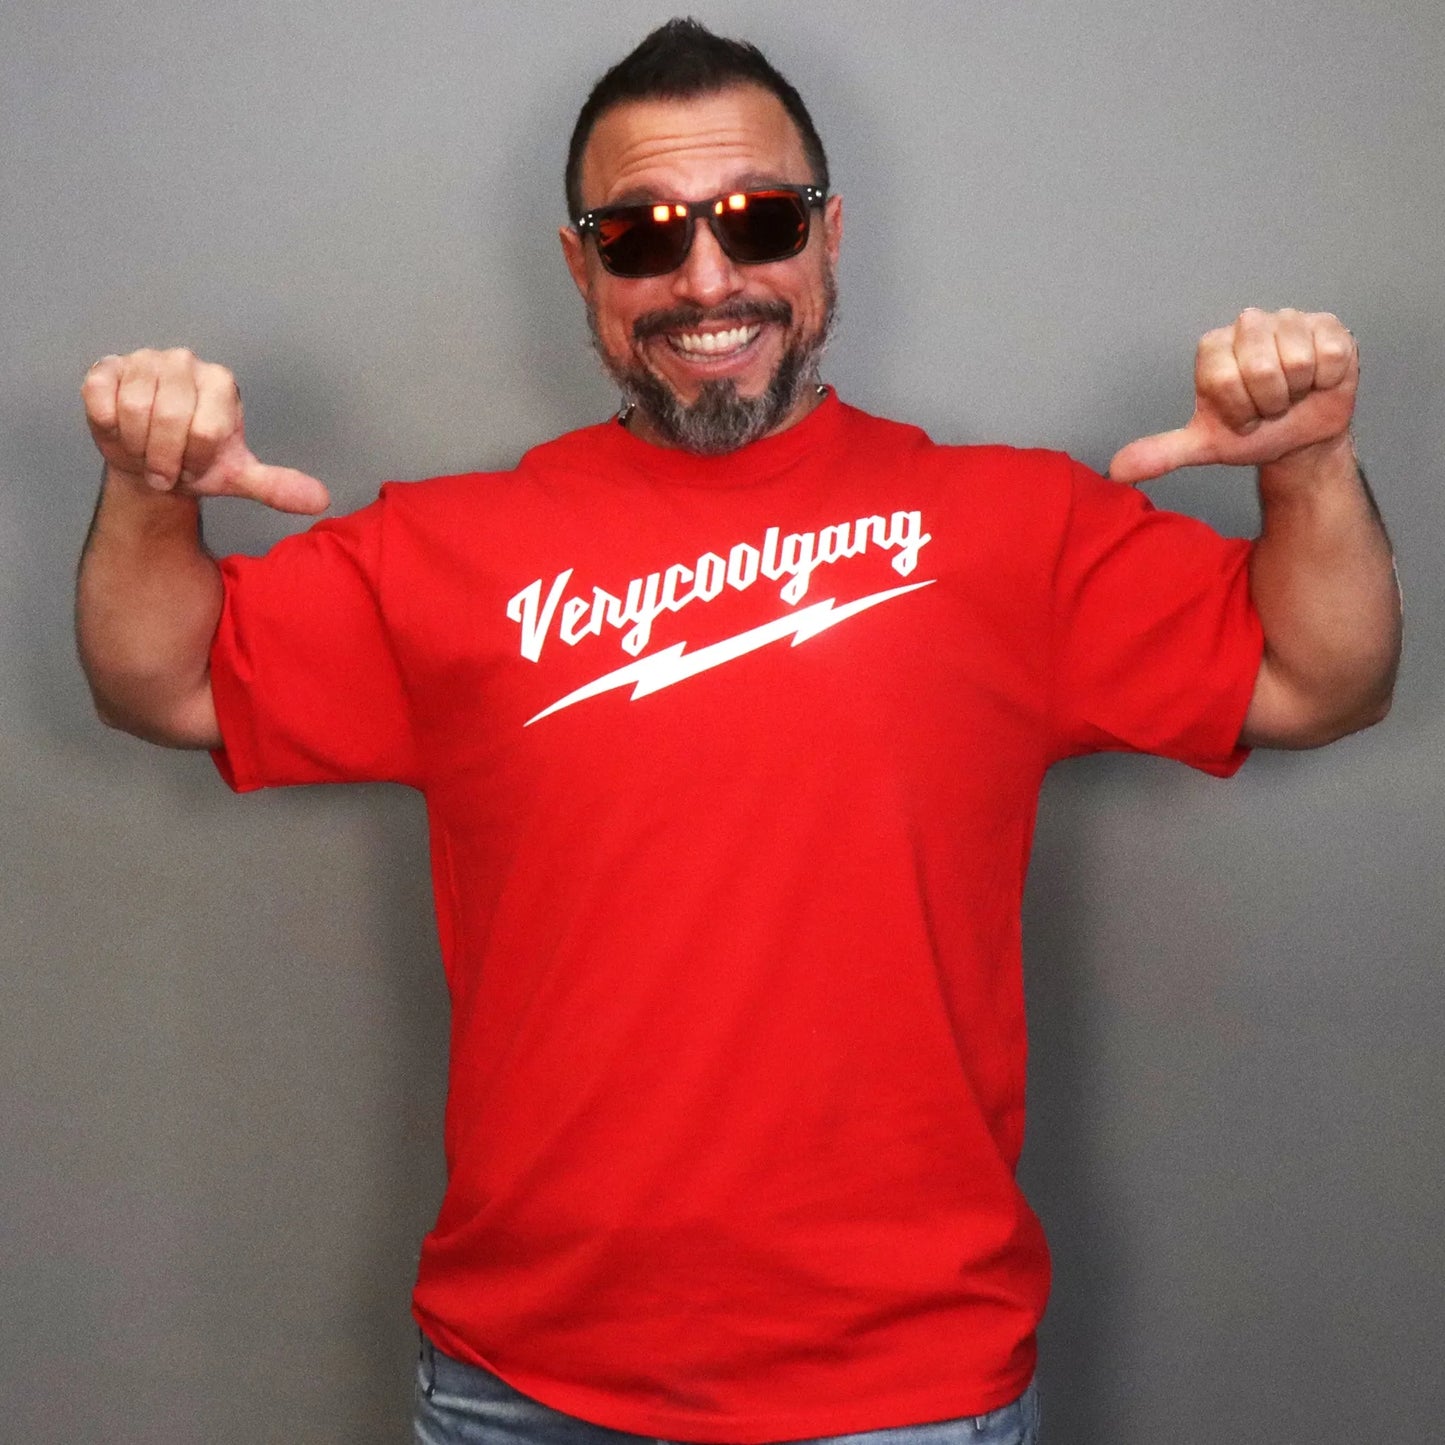 Limited Edition White VERYCOOLGANG Thunderbolt logo screen printed on vivid red T-Shirt - High-Quality Graphic Tee for a Stylish and Trendy Look